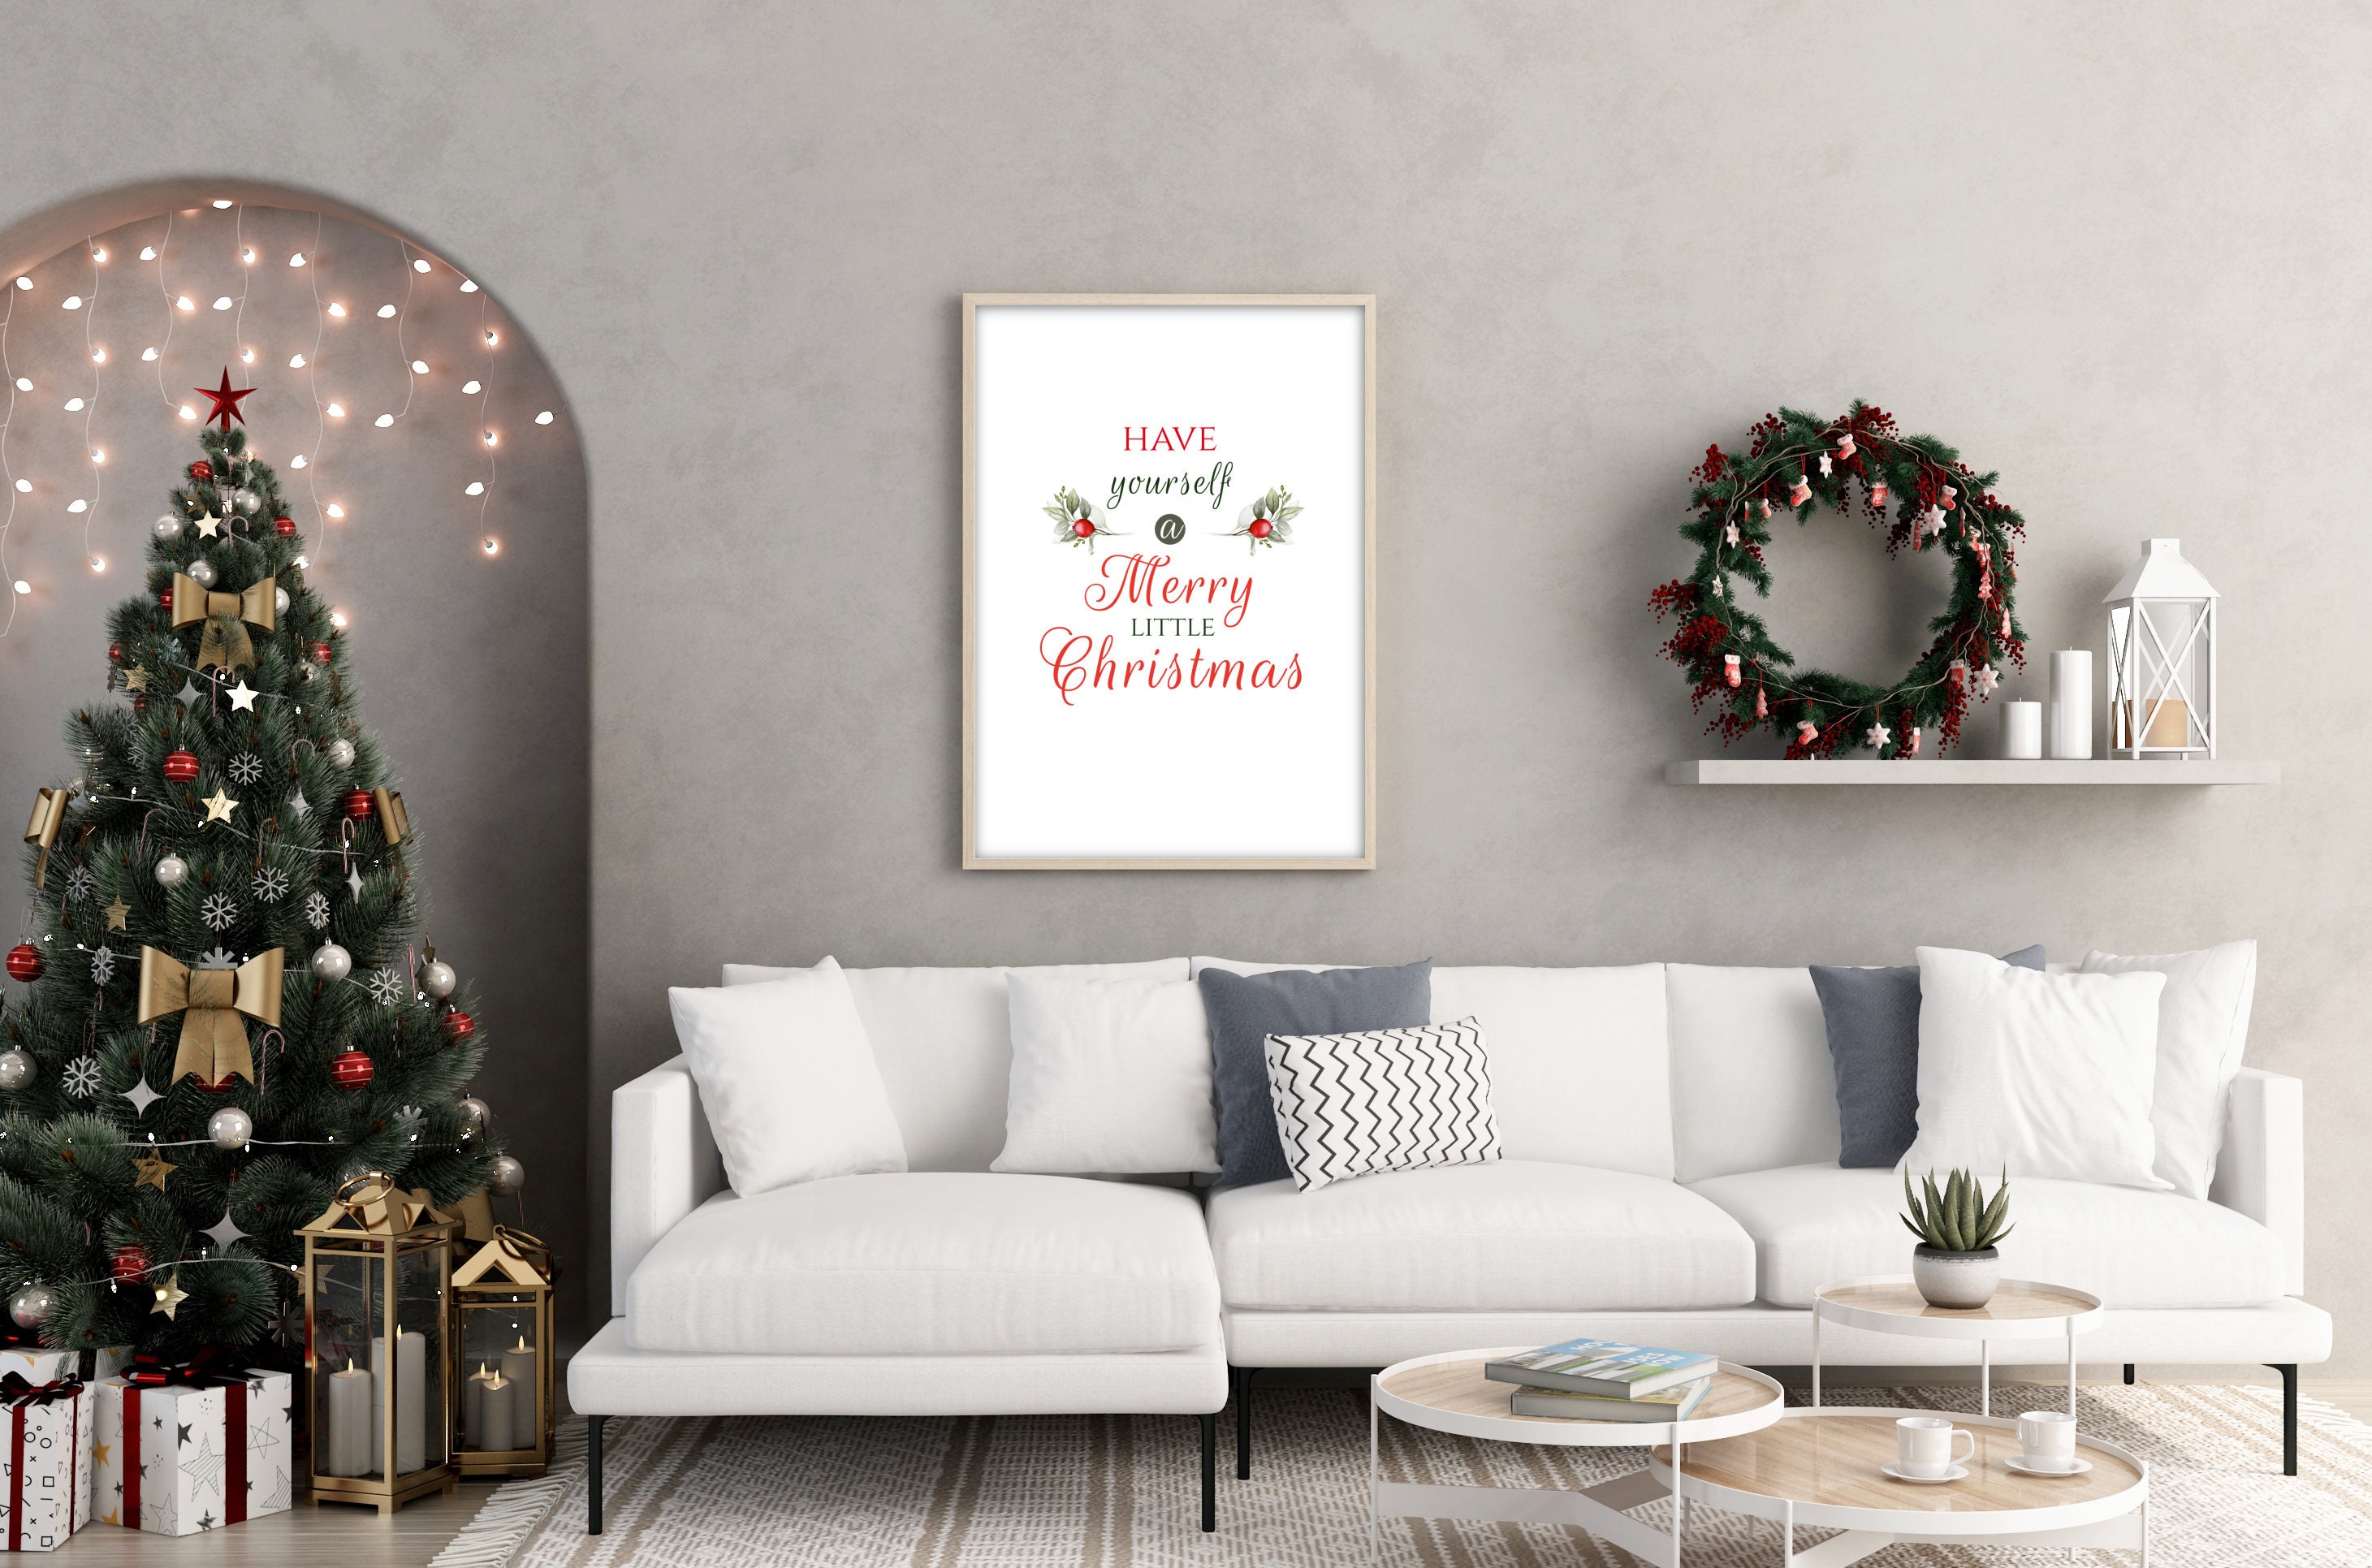 Have Yourself a Merry Little Christmas Wall Art Printable - Etsy